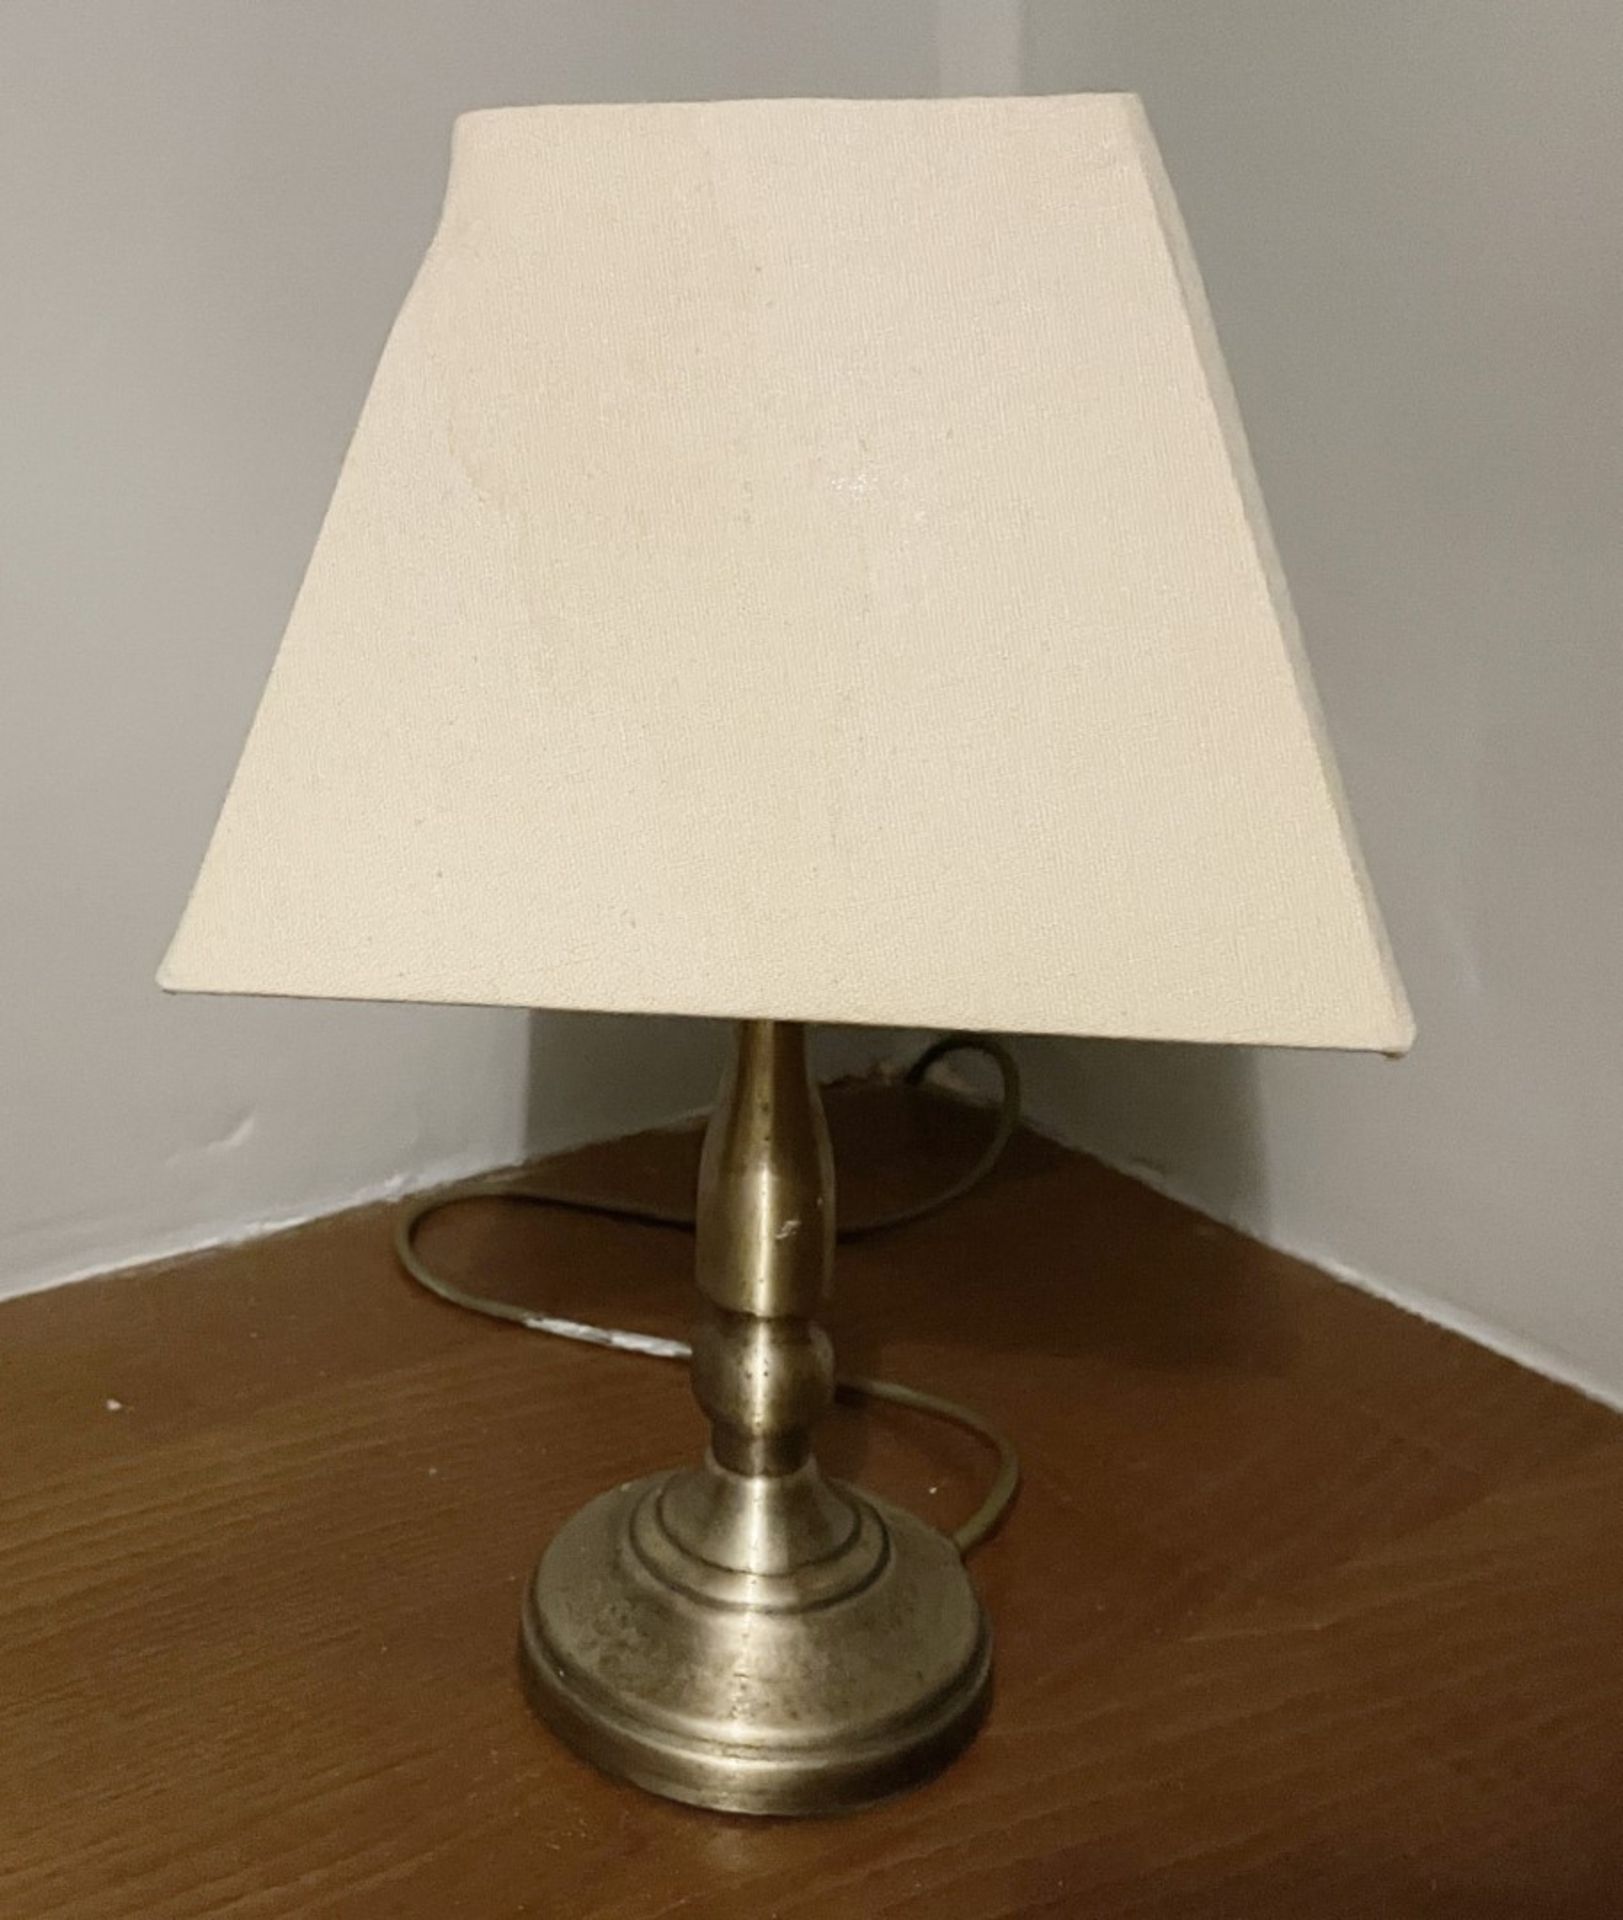 8 x Assorted Vintage-style Table Lamps with Metal Bases and a Variety of Shades - Image 3 of 6